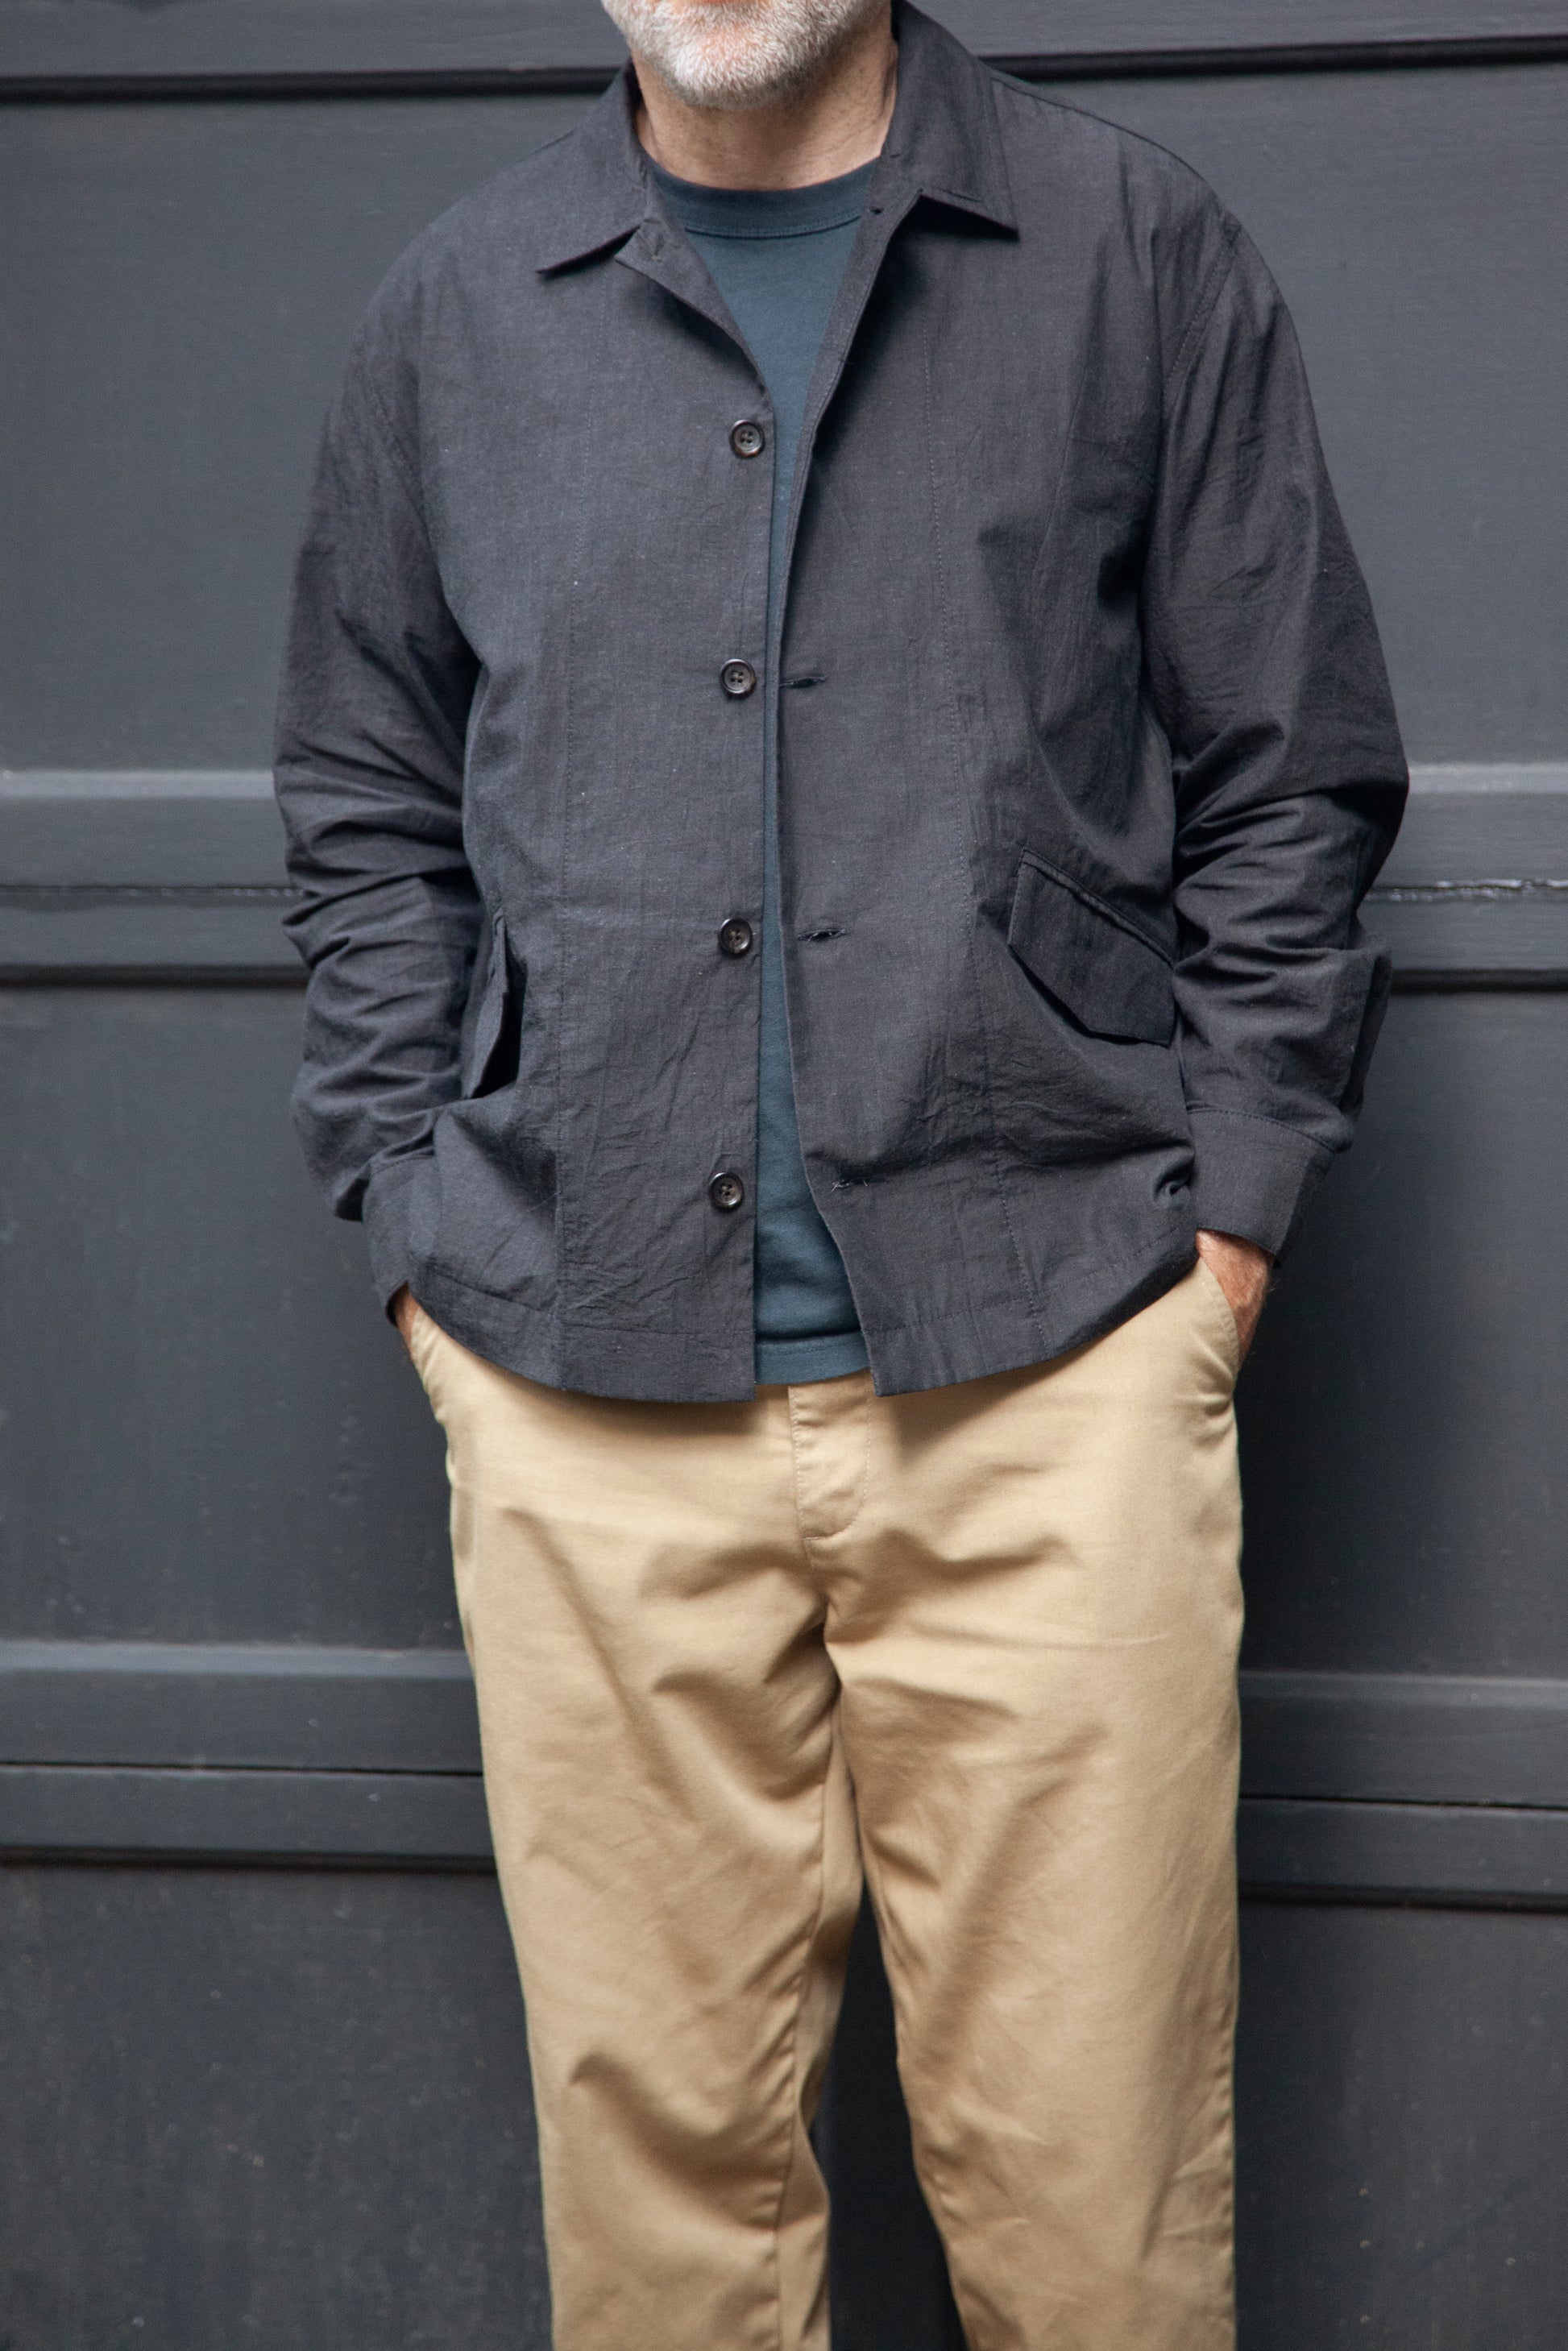 Front Male model wearing the painter shirt in slate grey, khaki pants and grey t-shirt